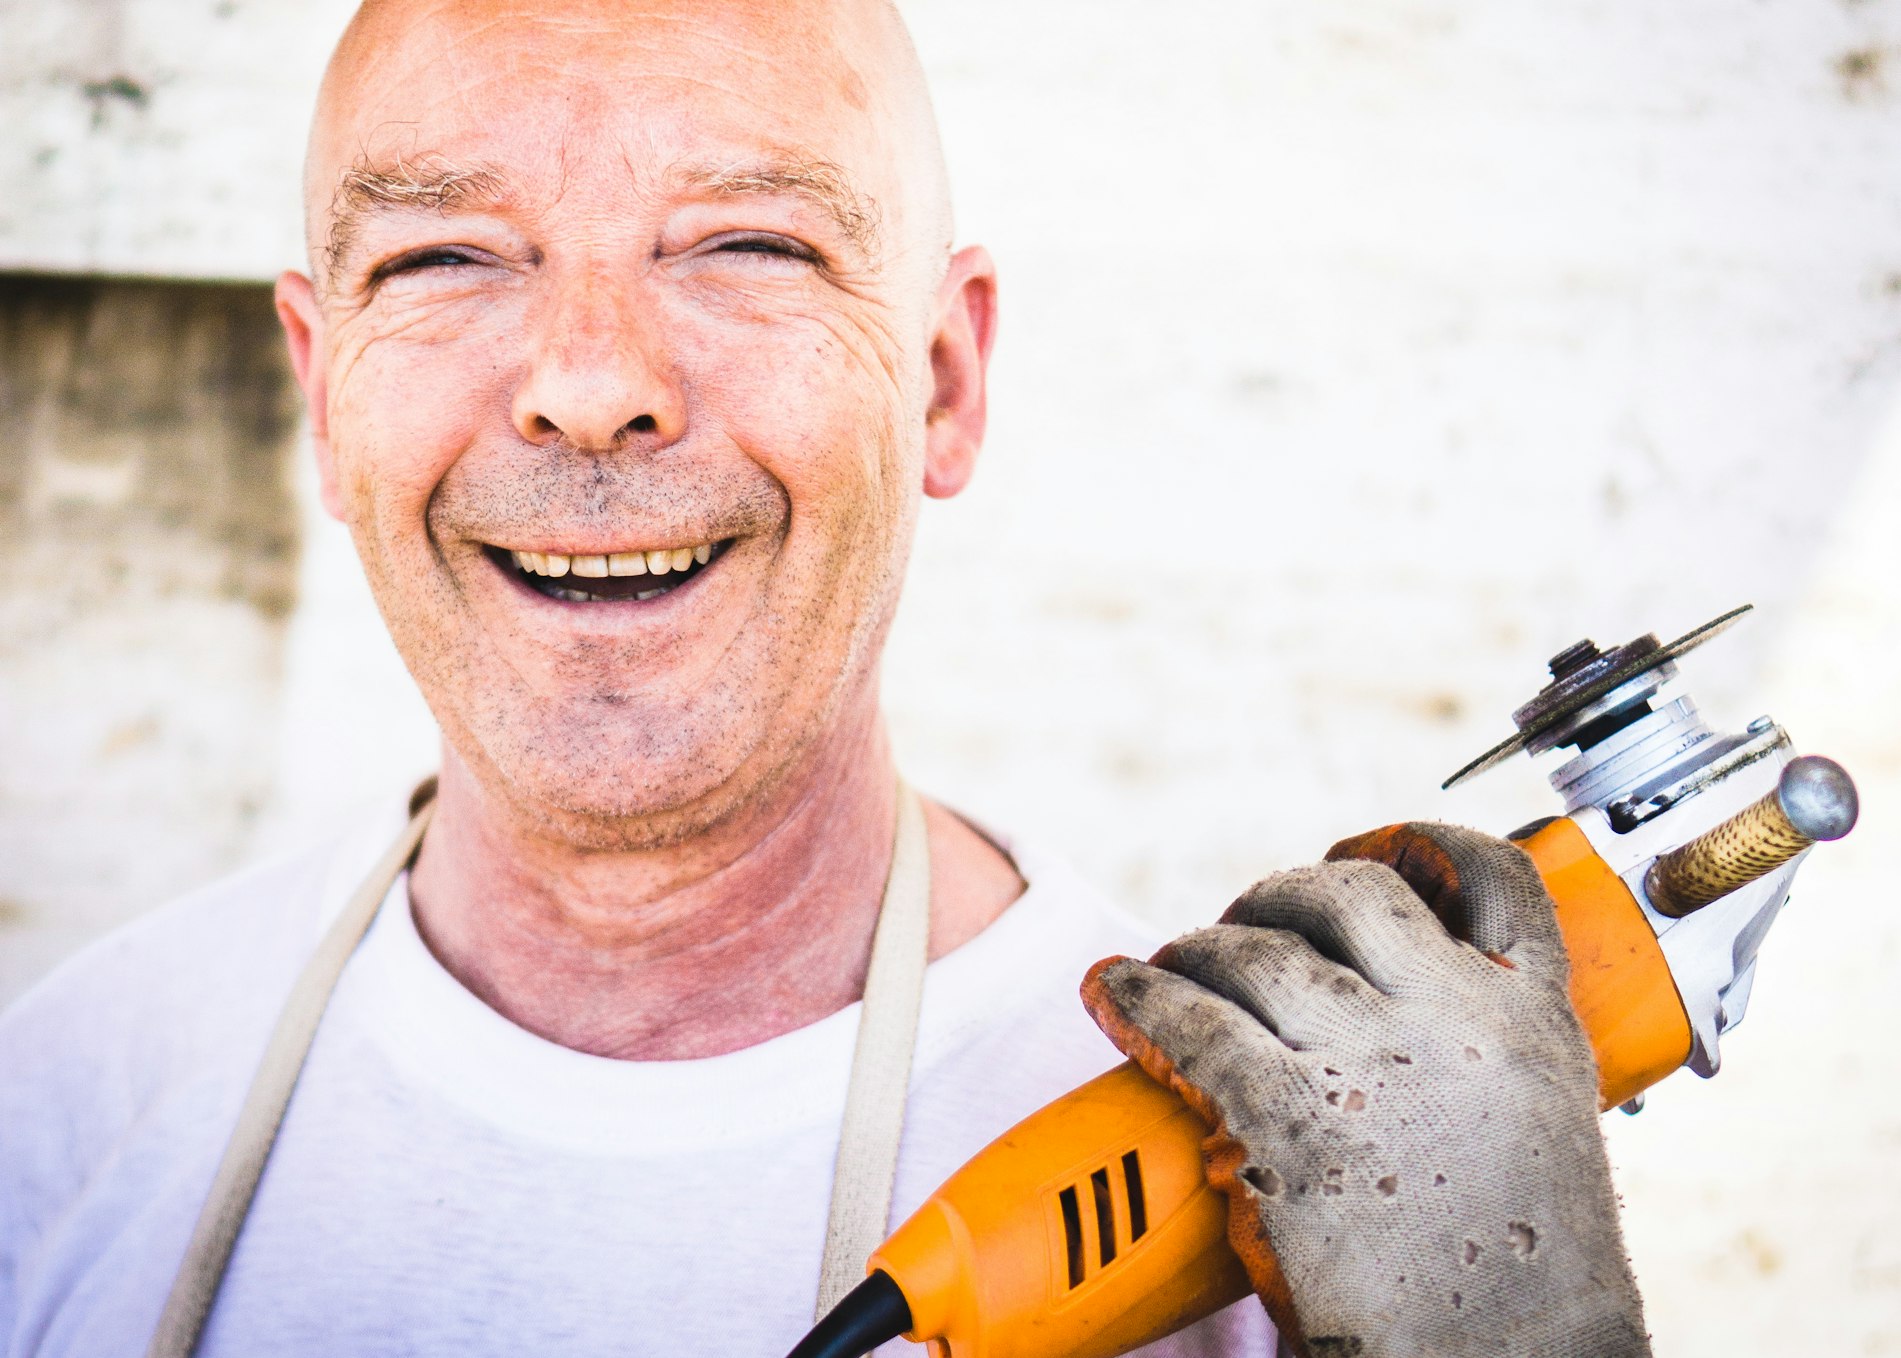 Man smiling while holding a power drill